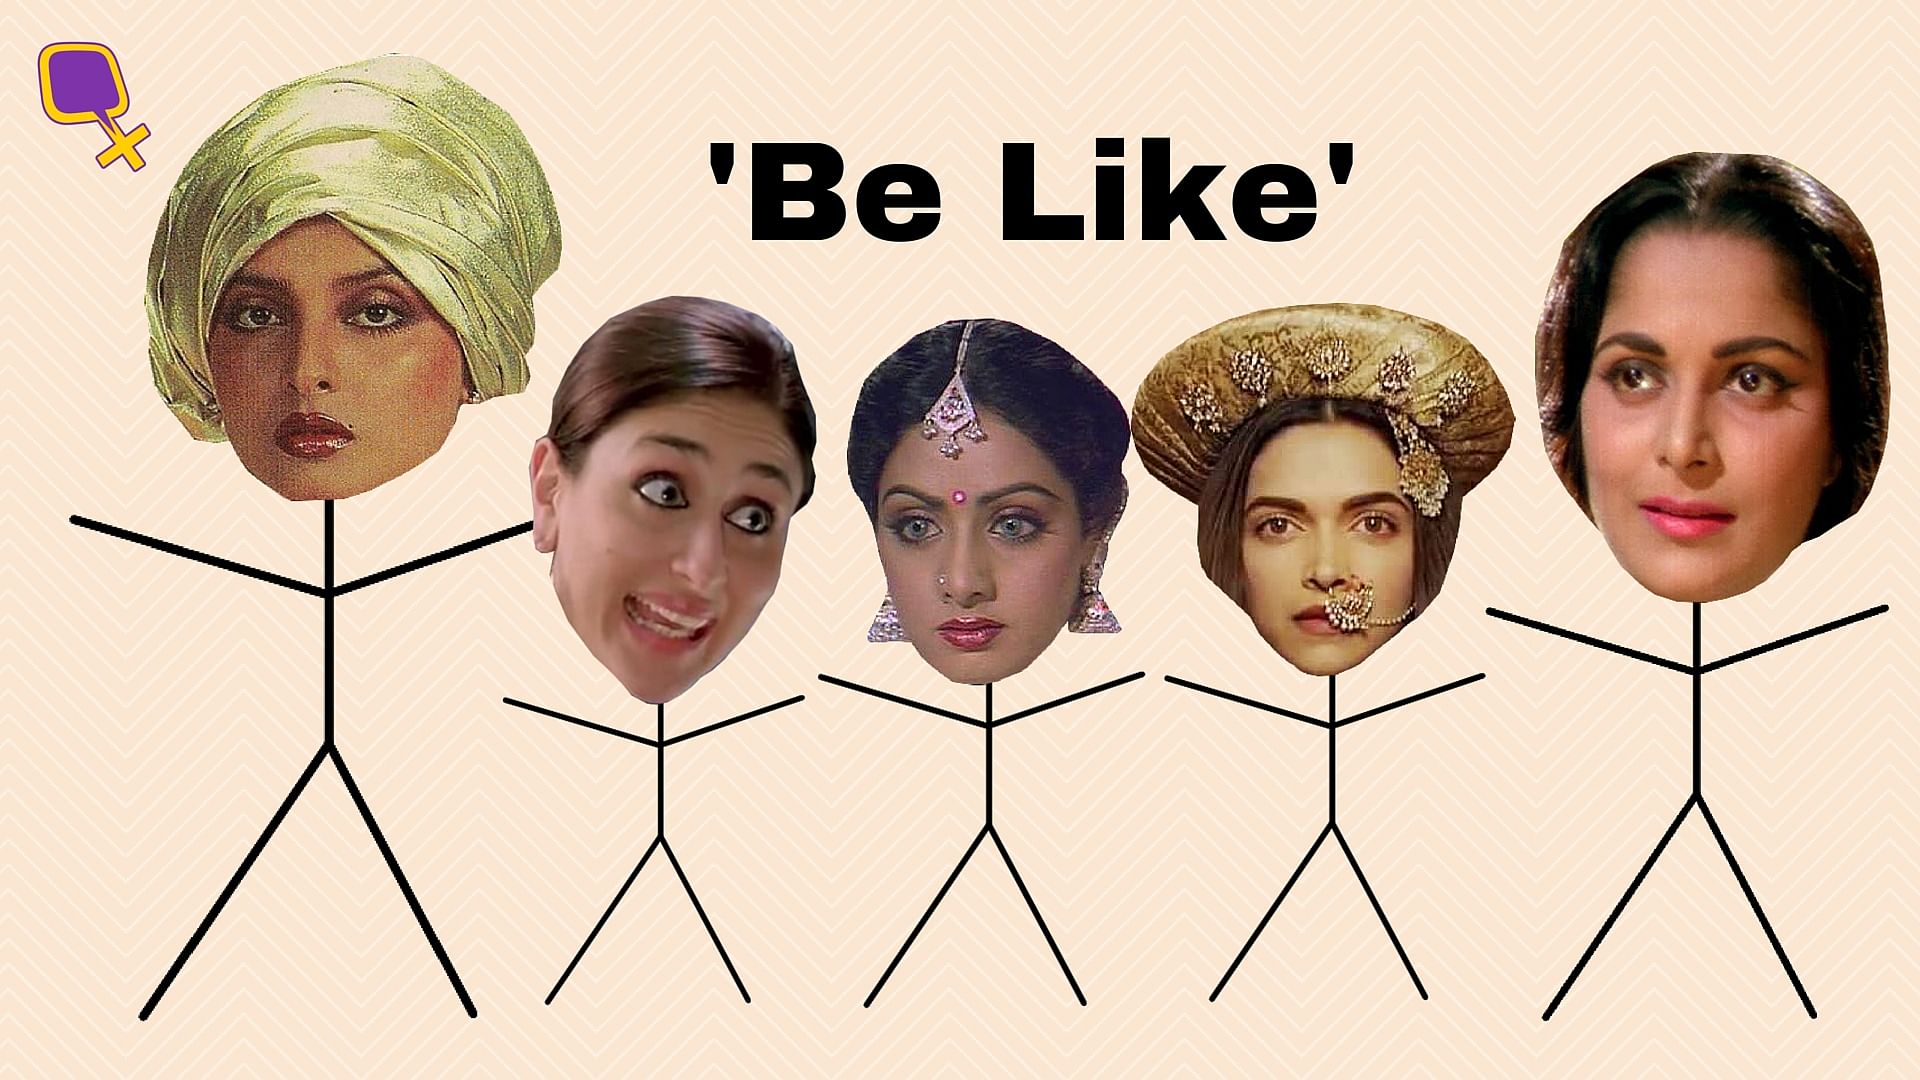 Bollywood divas ain’t just pretty, they’re also pretty badass! Be like them.&nbsp;